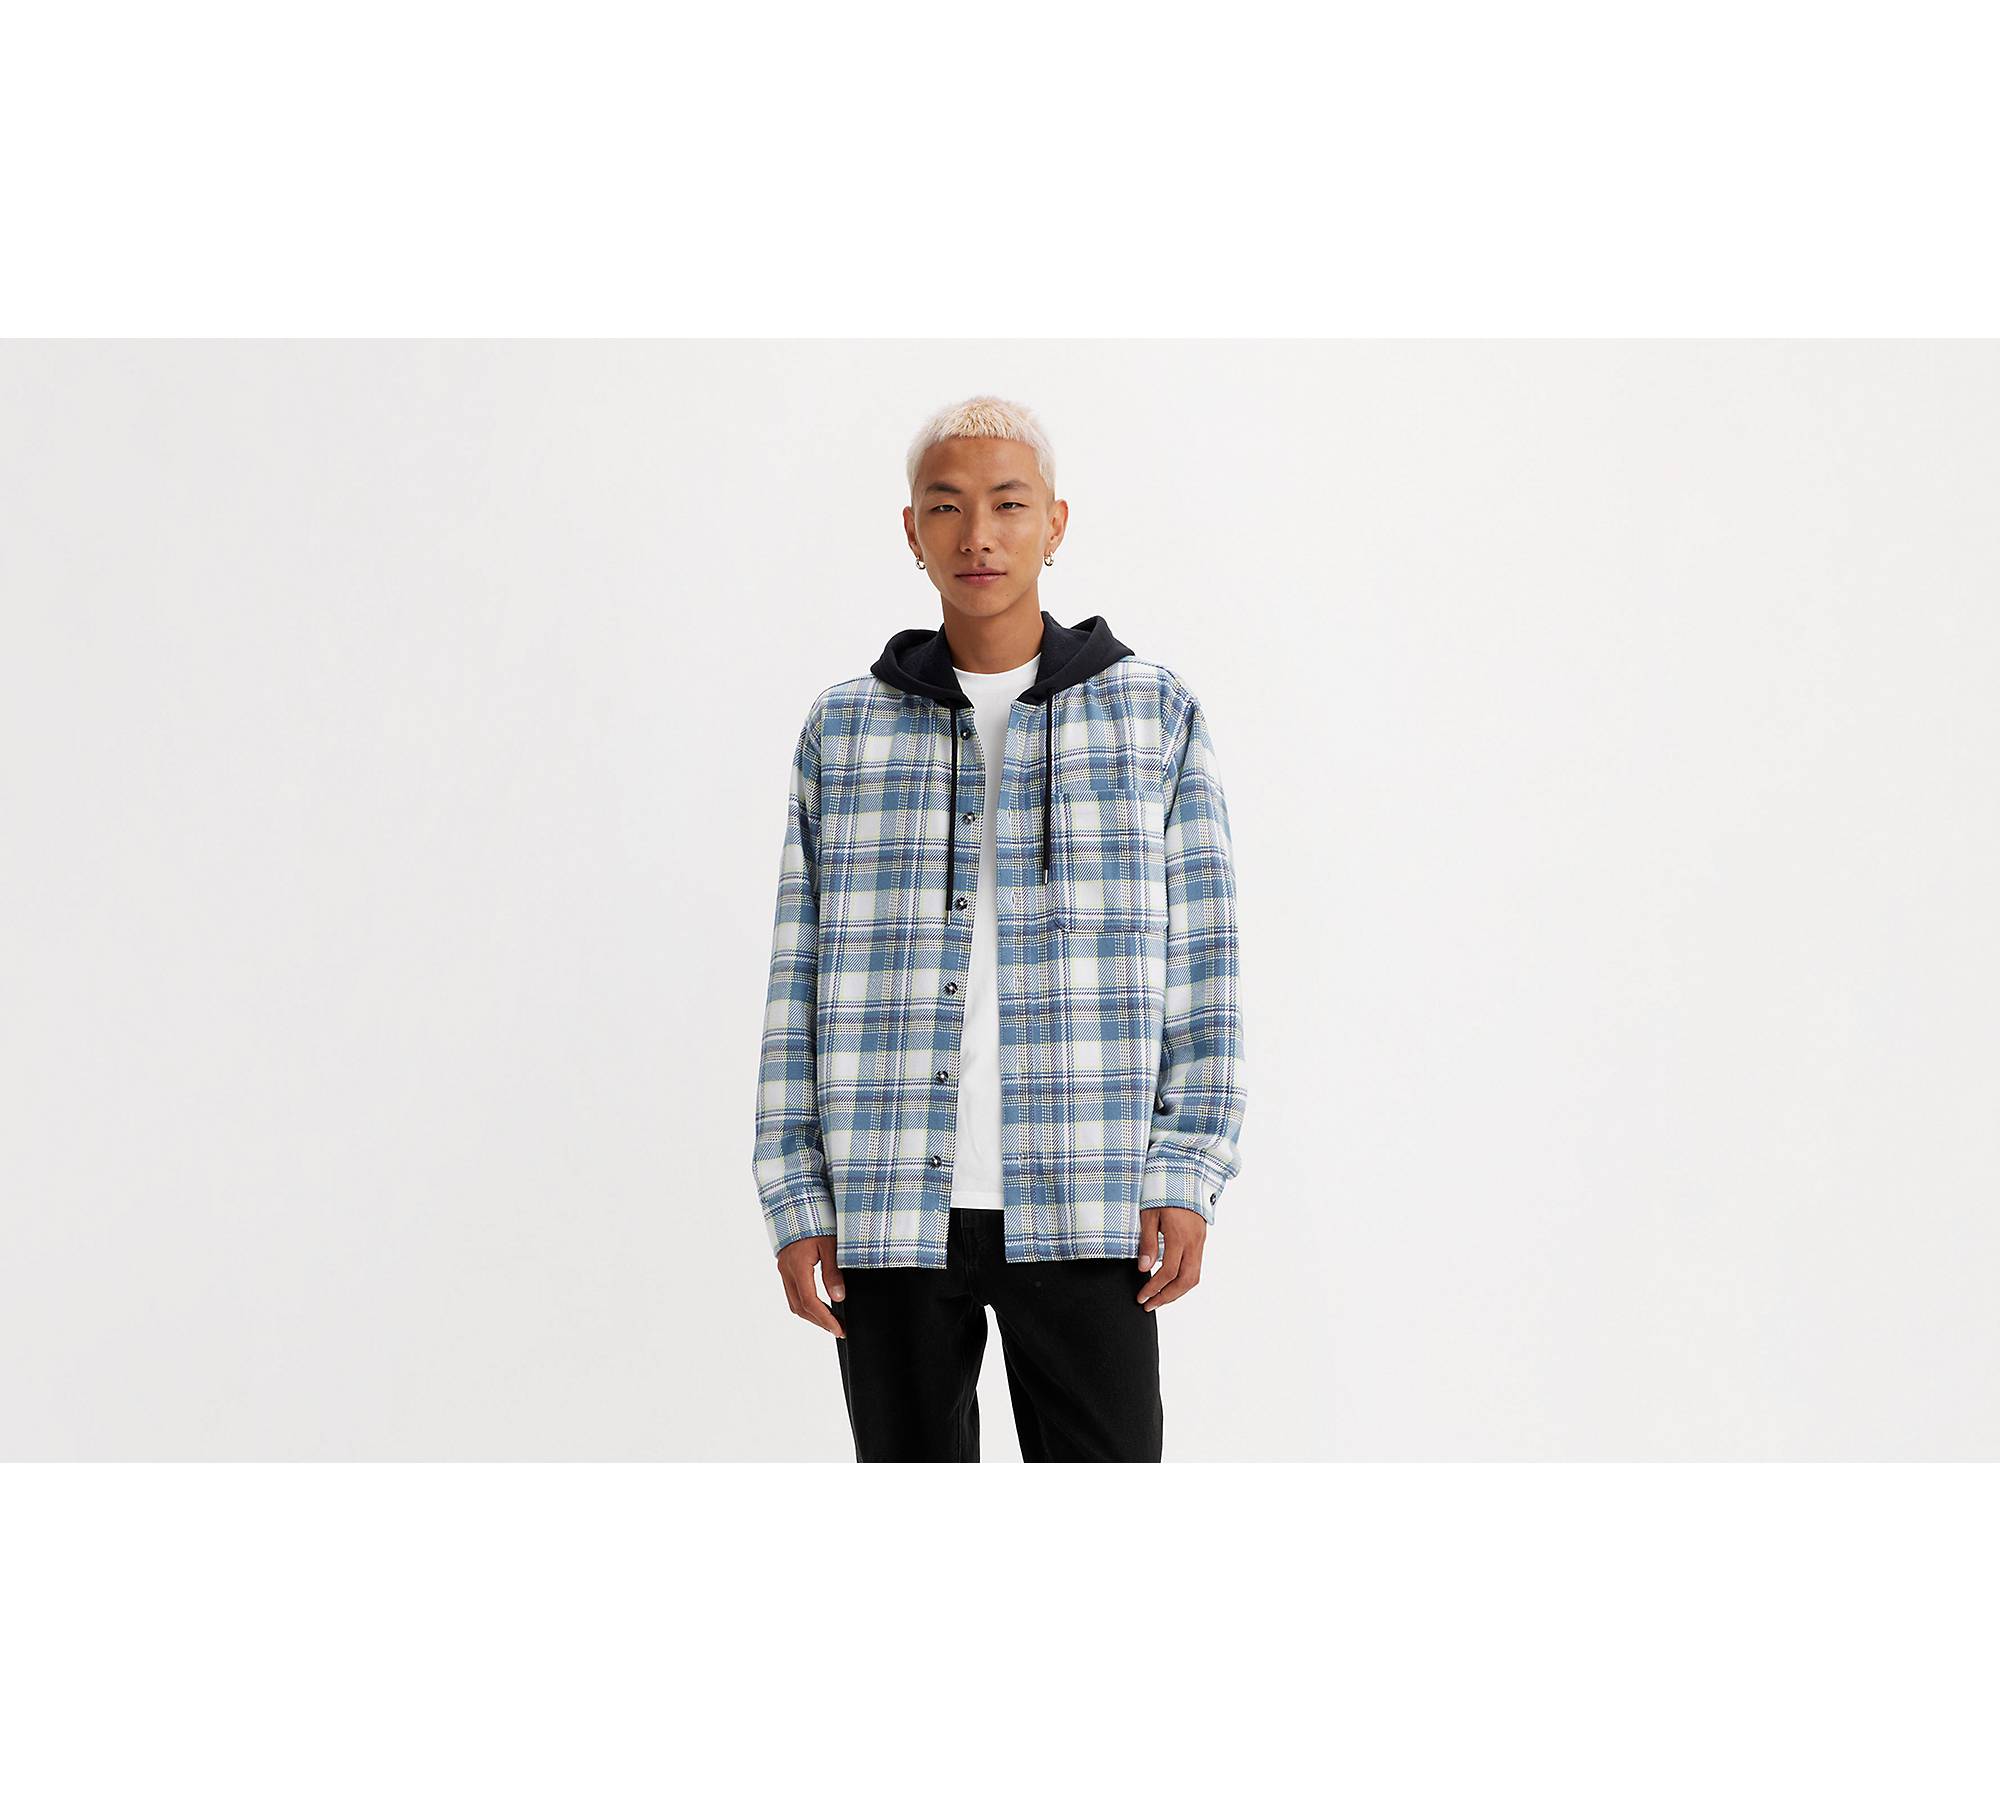 Check The Forecast Cropped Flannel Top - Black/combo